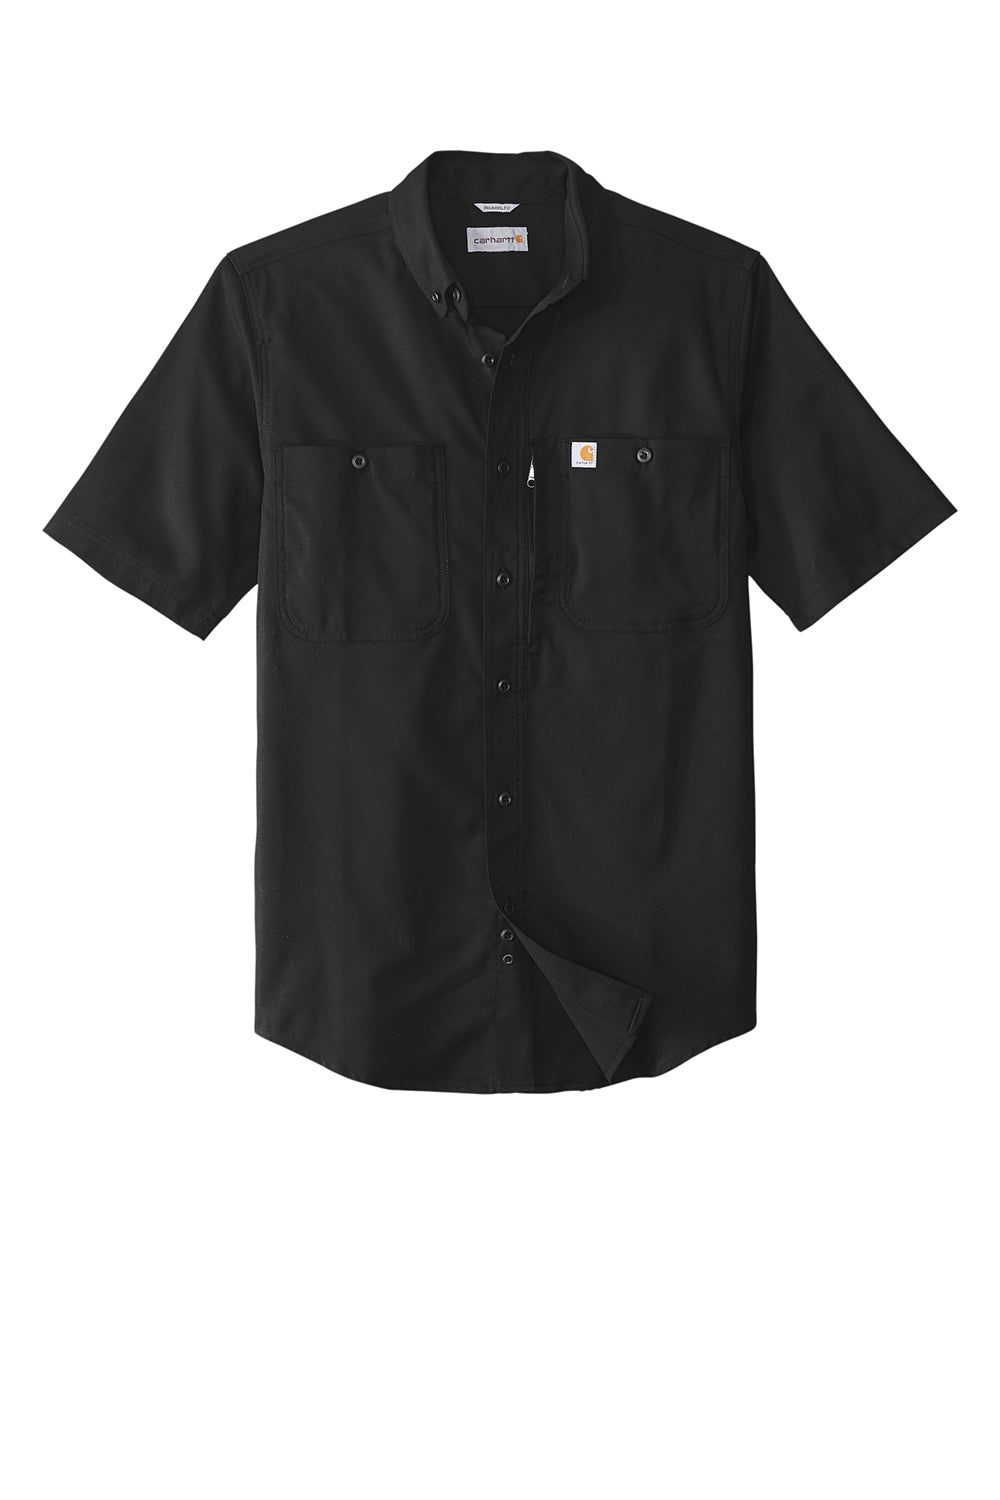 Carhartt CT102537 Mens Rugged Professional Series Wrinkle Resistant Short Sleeve Button Down Shirt w/ Pocket Black Flat Front